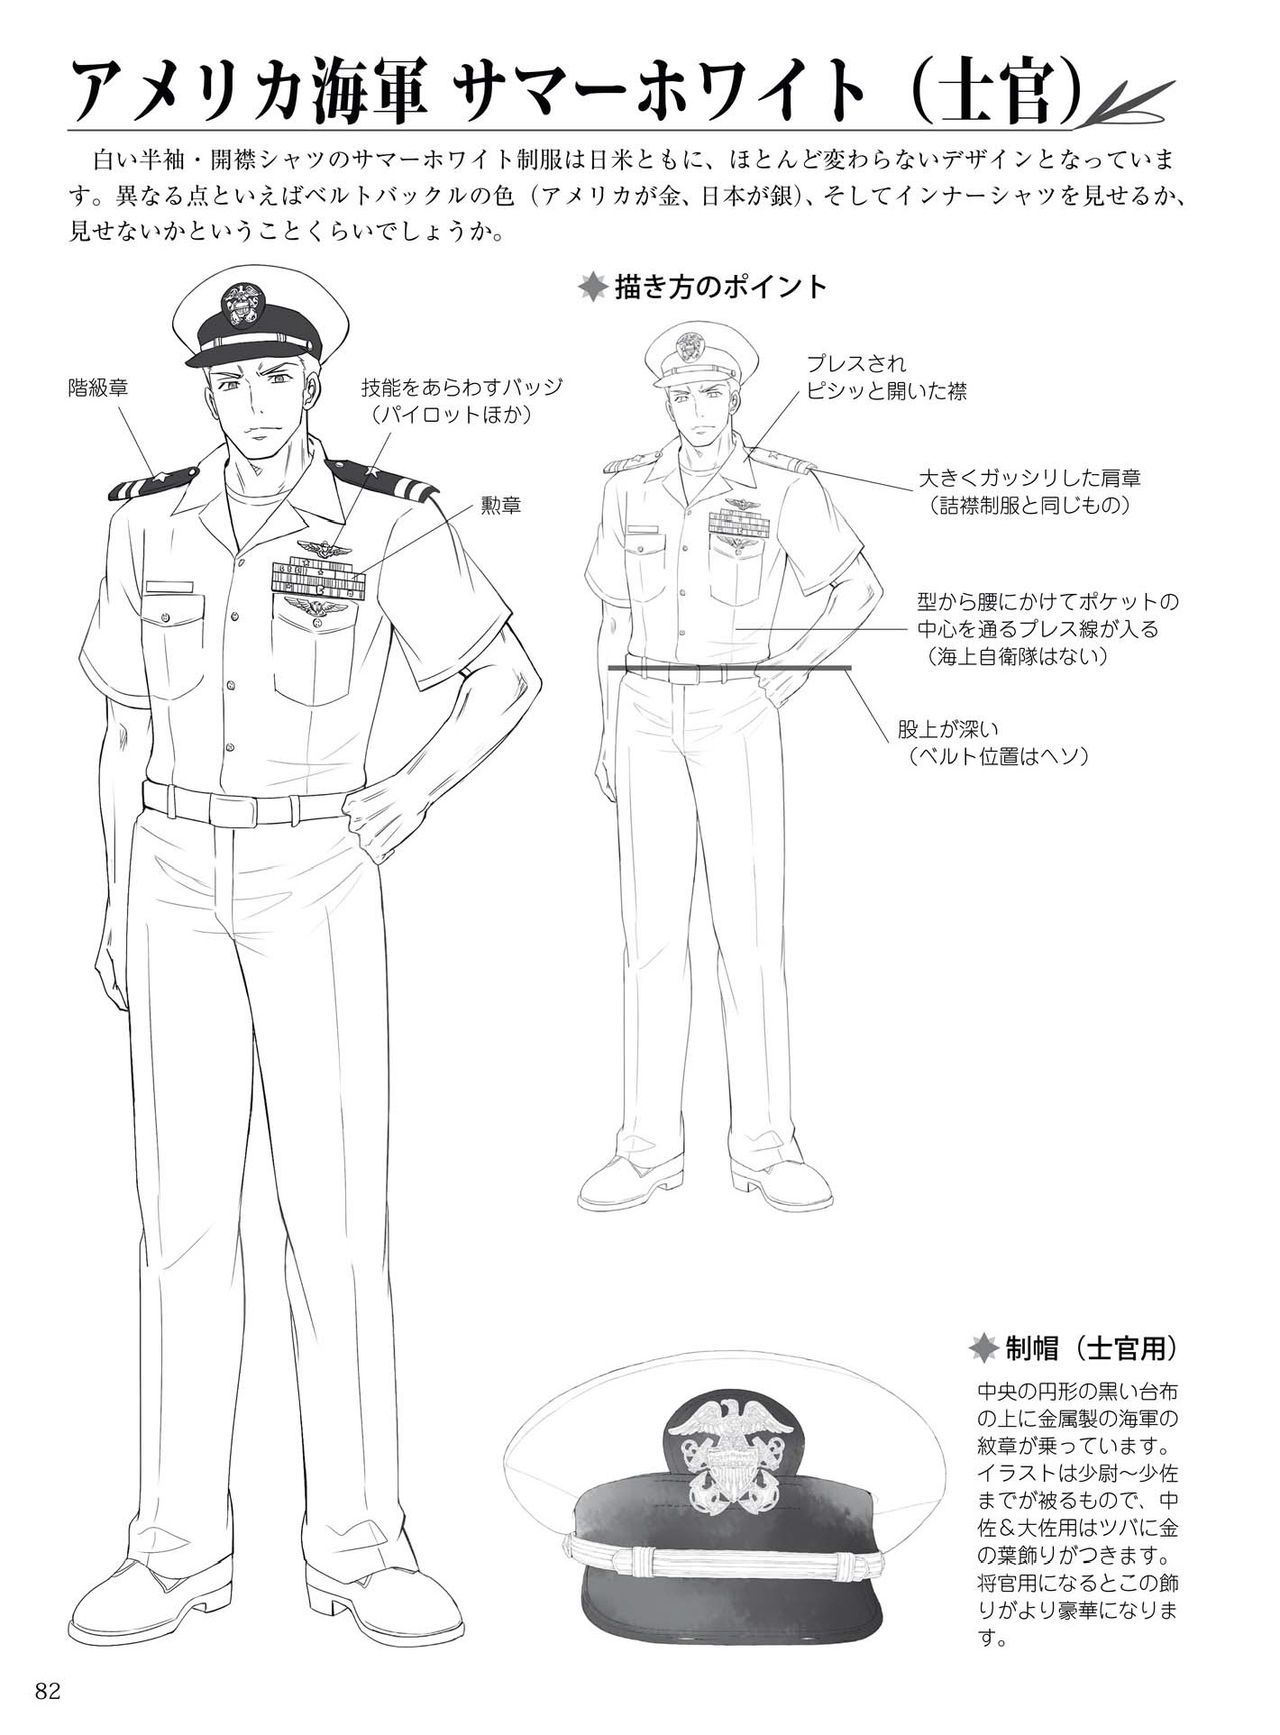 How to draw military uniforms and uniforms From Self-Defense Forces 軍服・制服の描き方 アメリカ軍・自衛隊の制服から戦闘服まで 85